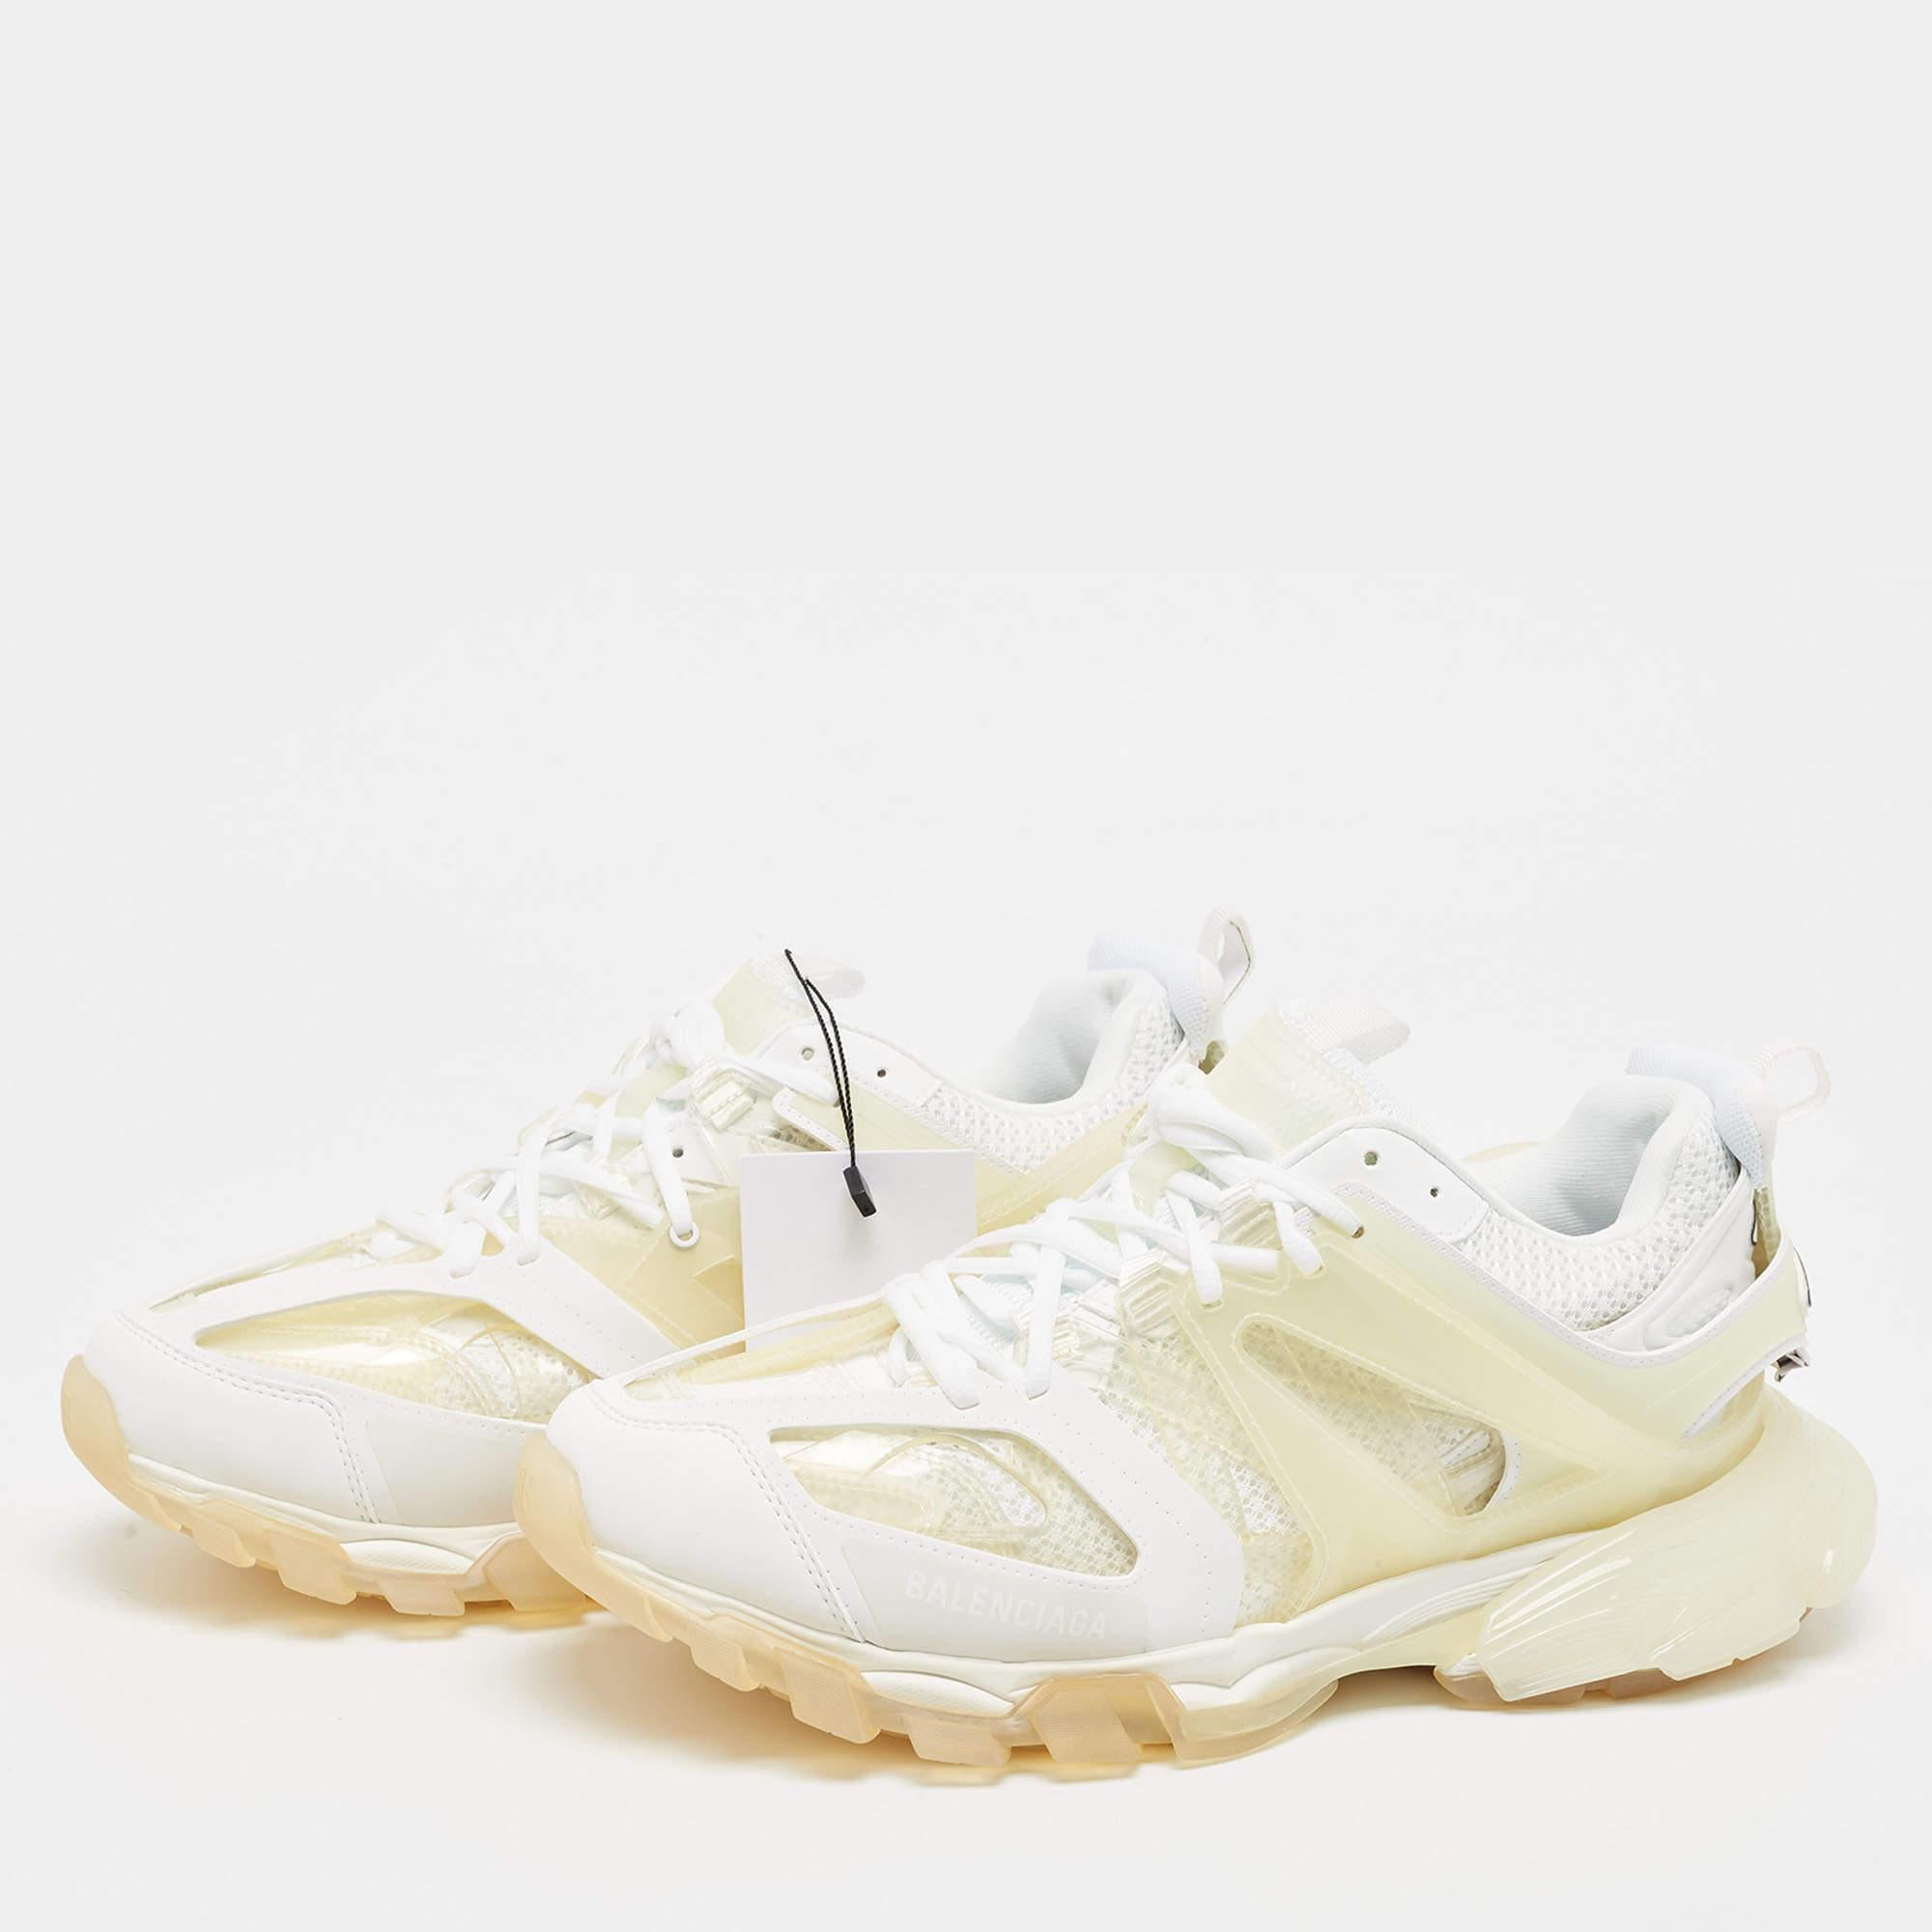 Balenciaga White/Transparent Leather and PVC Track Clear Sole Sneakers Size 44 2